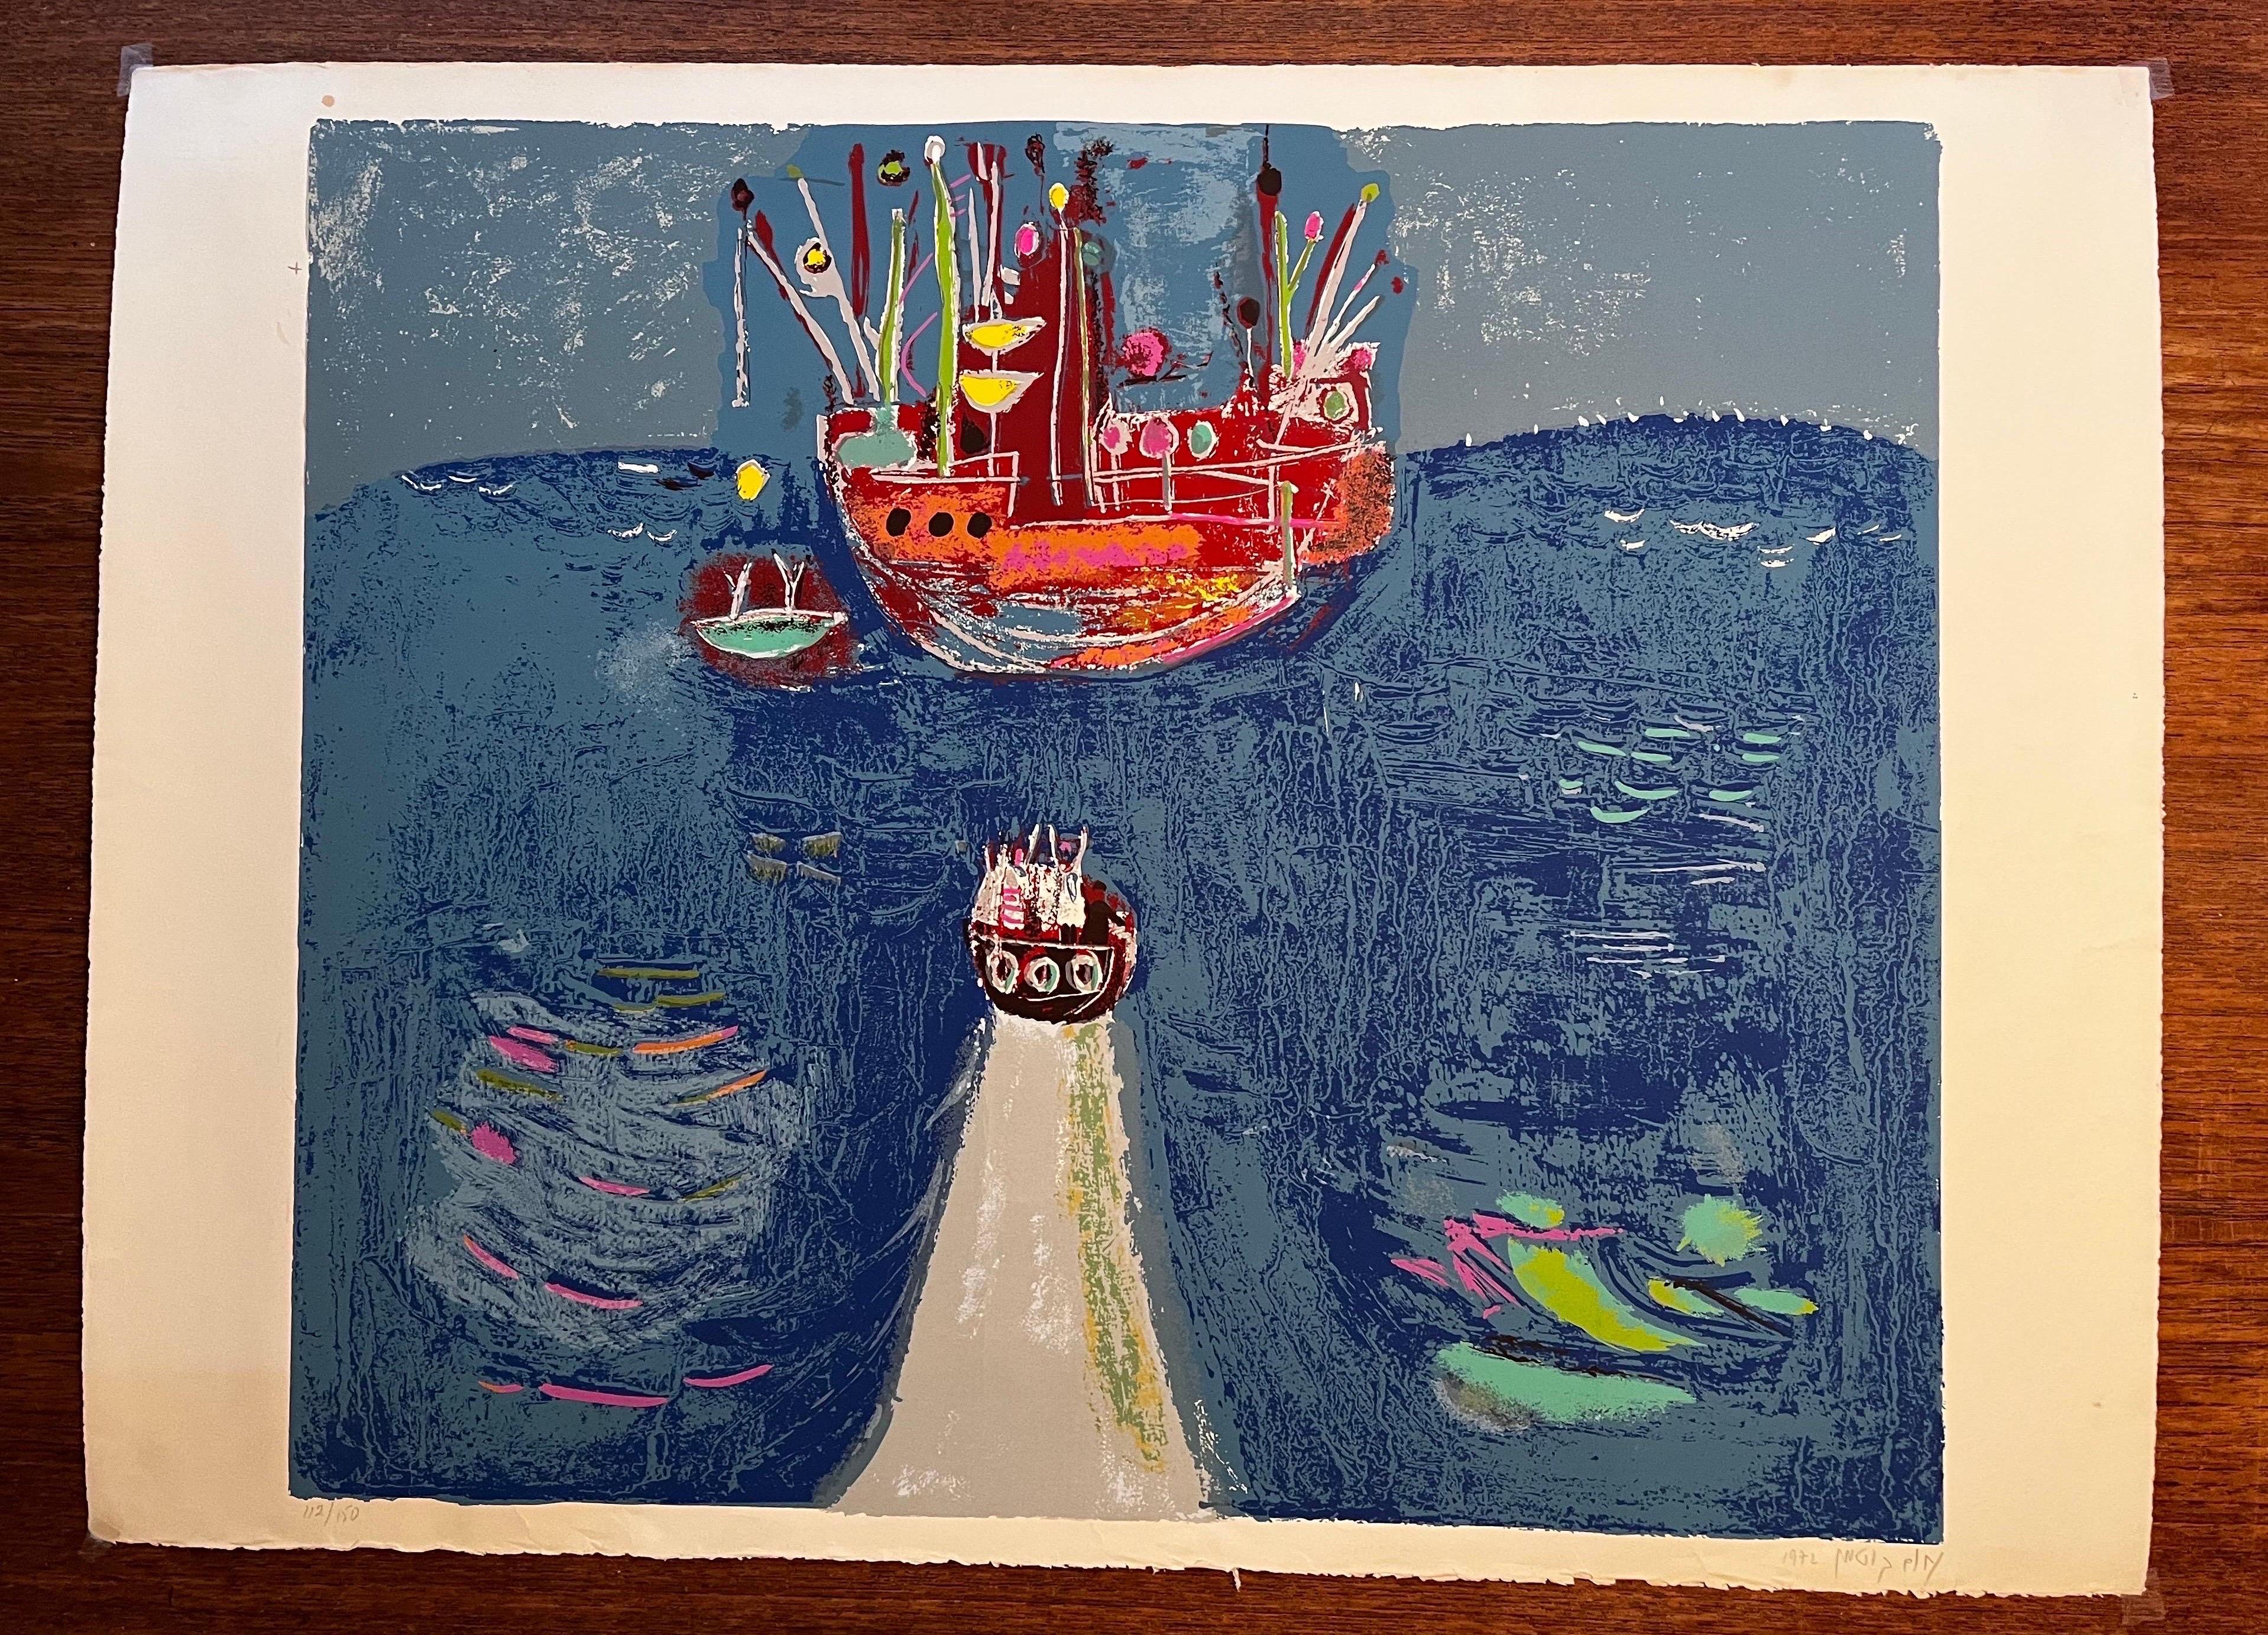 Abstract Image of Boats - Lithograph - signed
Dated 1972 - 112 or 150

Very nice abstract image with great color.
Will look great once framed.

a couple of spots along edge
a vertical fold - very hard to see 